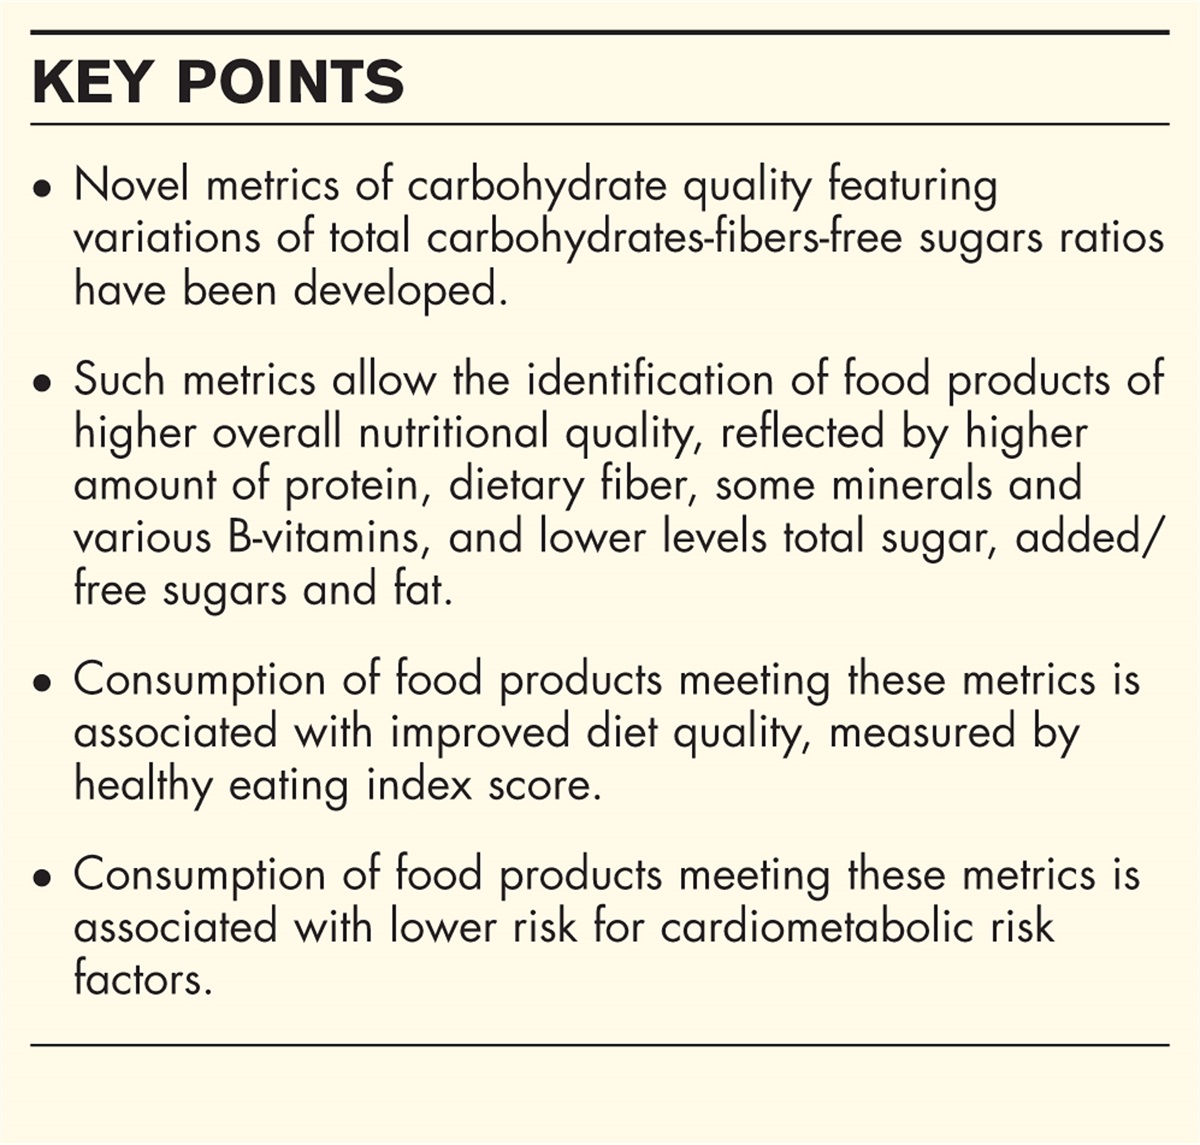 New metrics of dietary carbohydrate quality